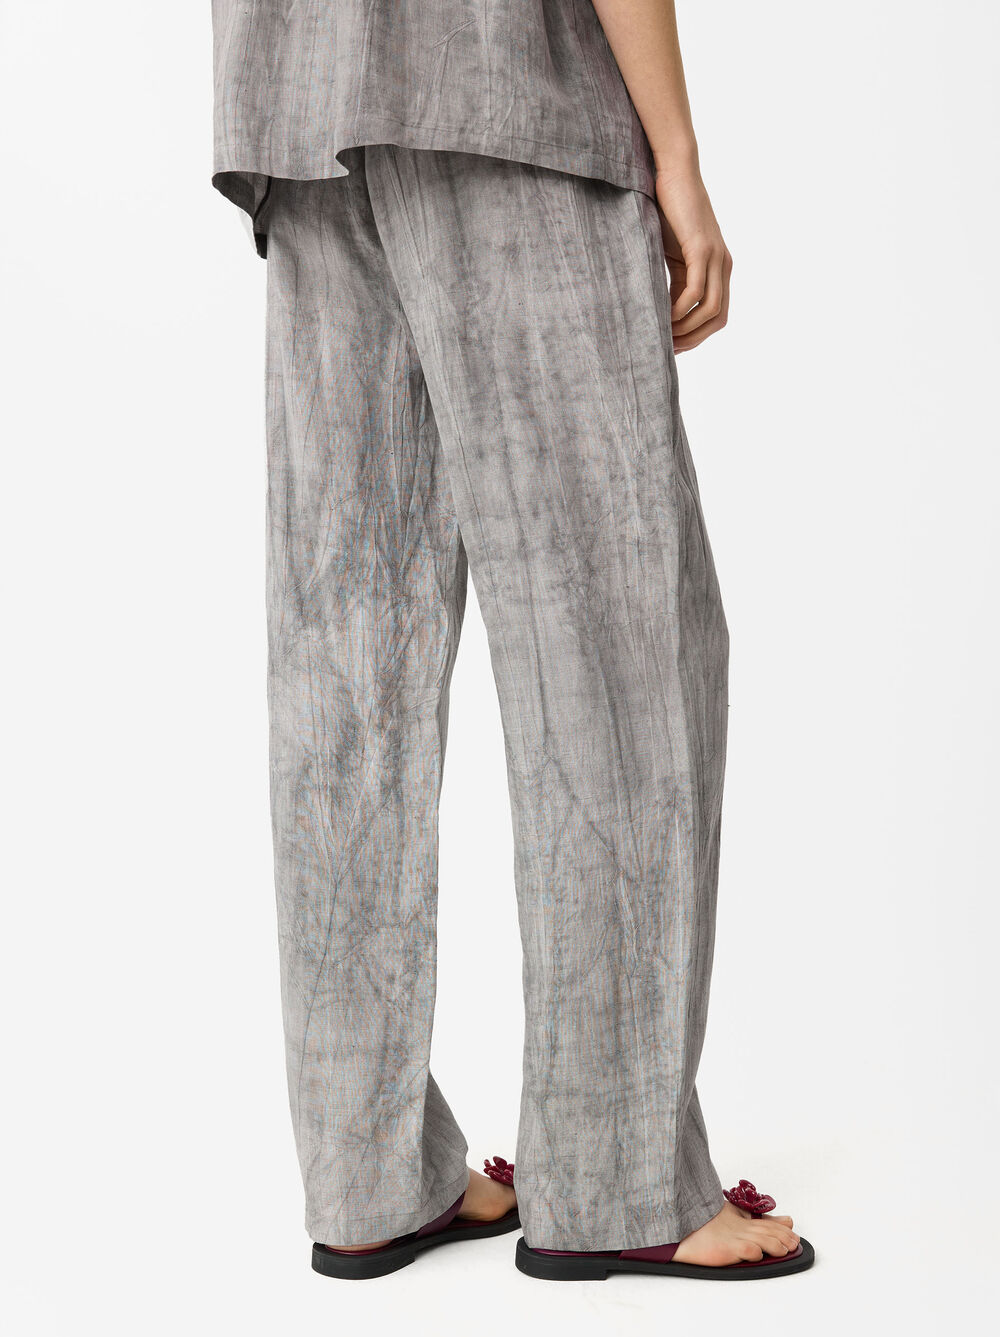 Printed Loose-Fitting Trousers